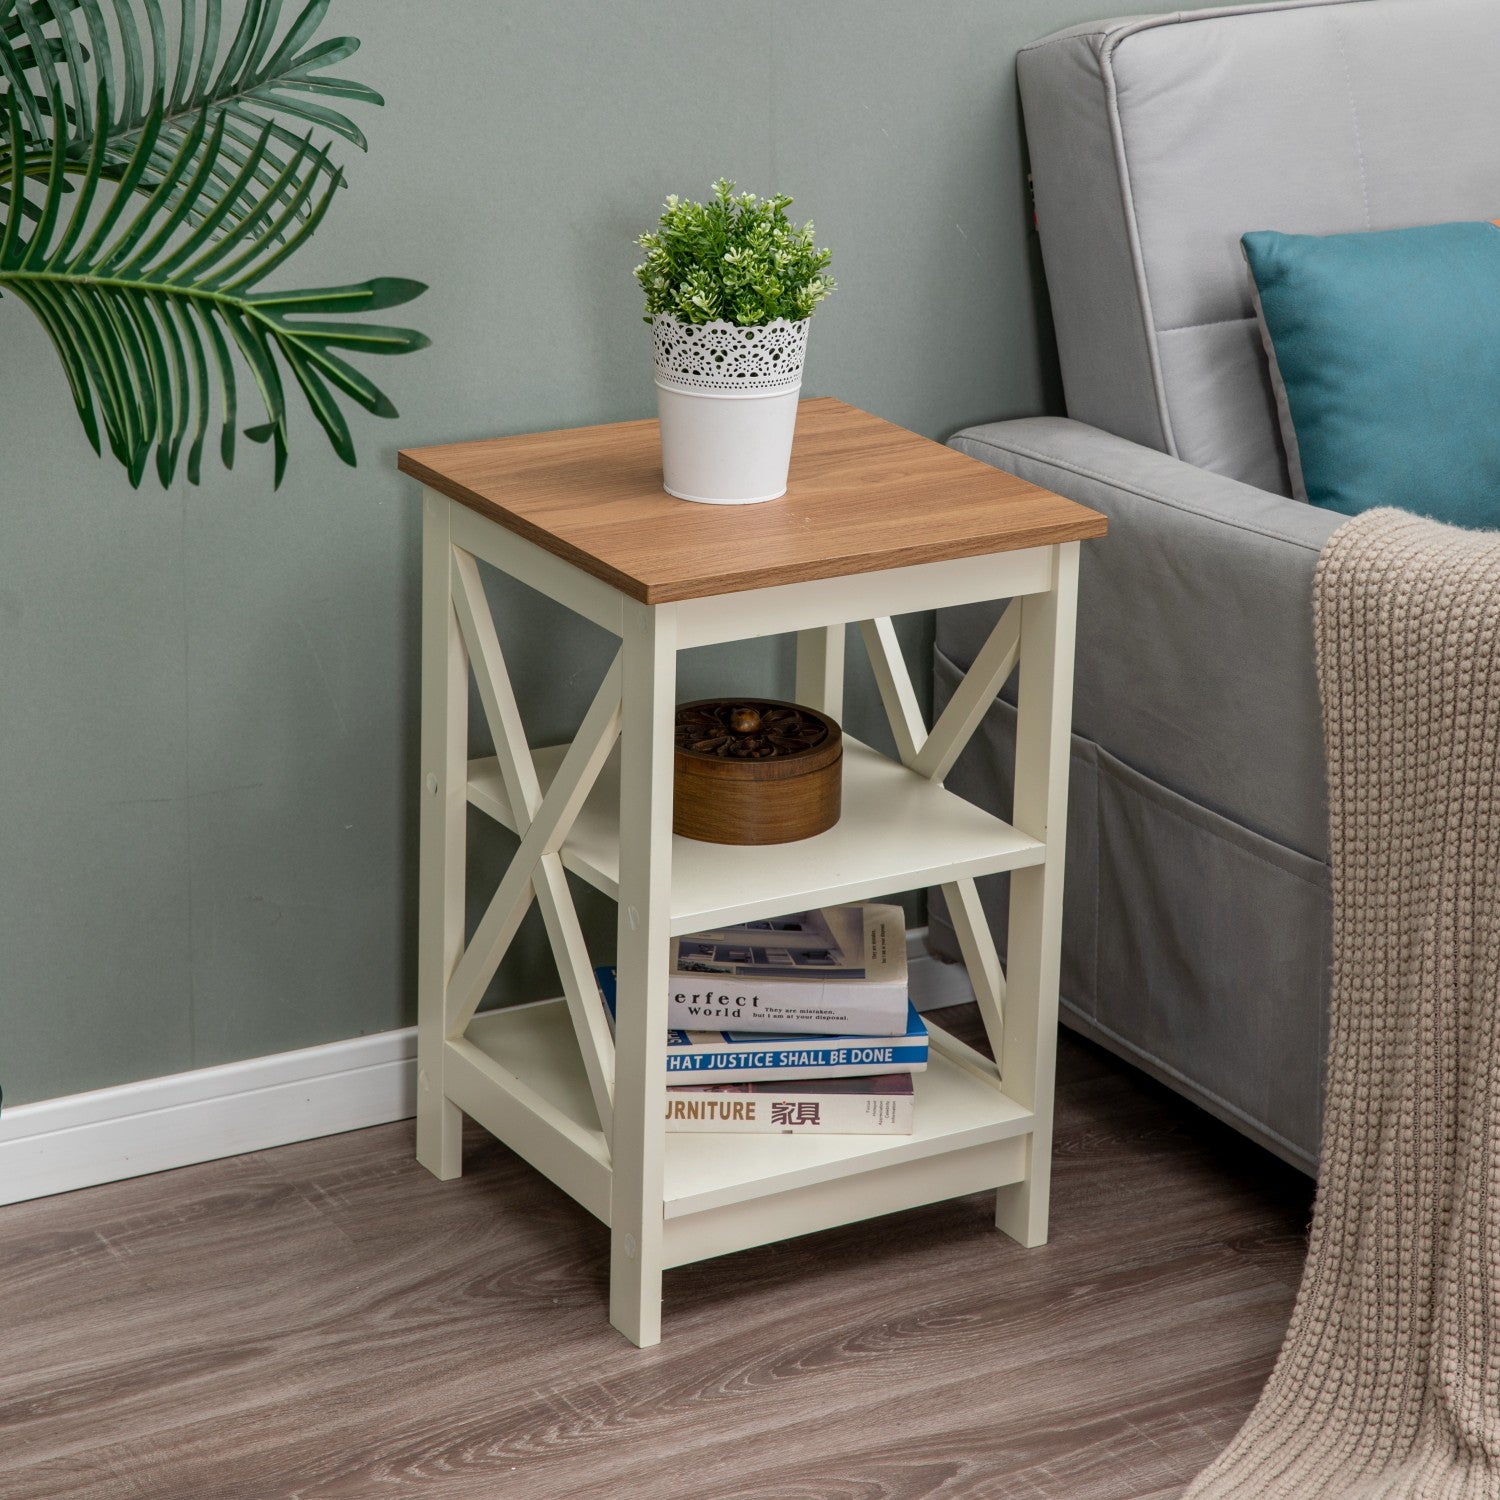 PHI VILLA Farmhouse-Inspired Manufactured Wood Coffee Table